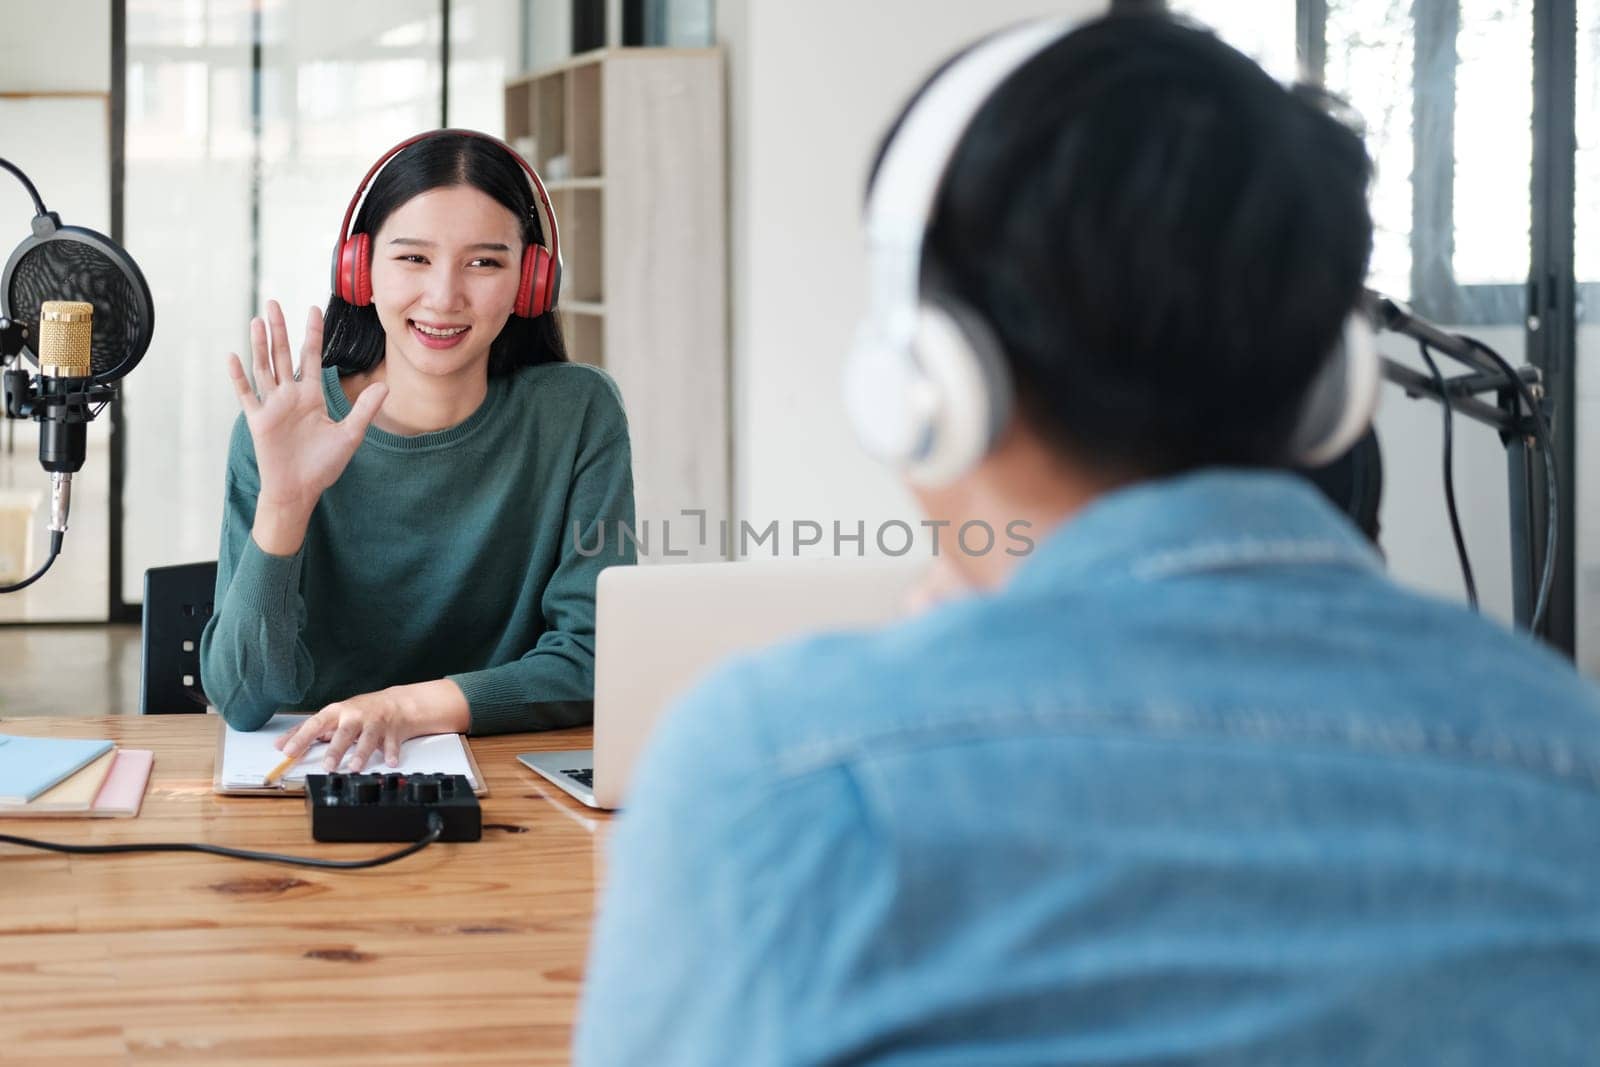 A woman wearing headphones is talking to someone on a laptop. The woman is smiling and waving at the person on the laptop